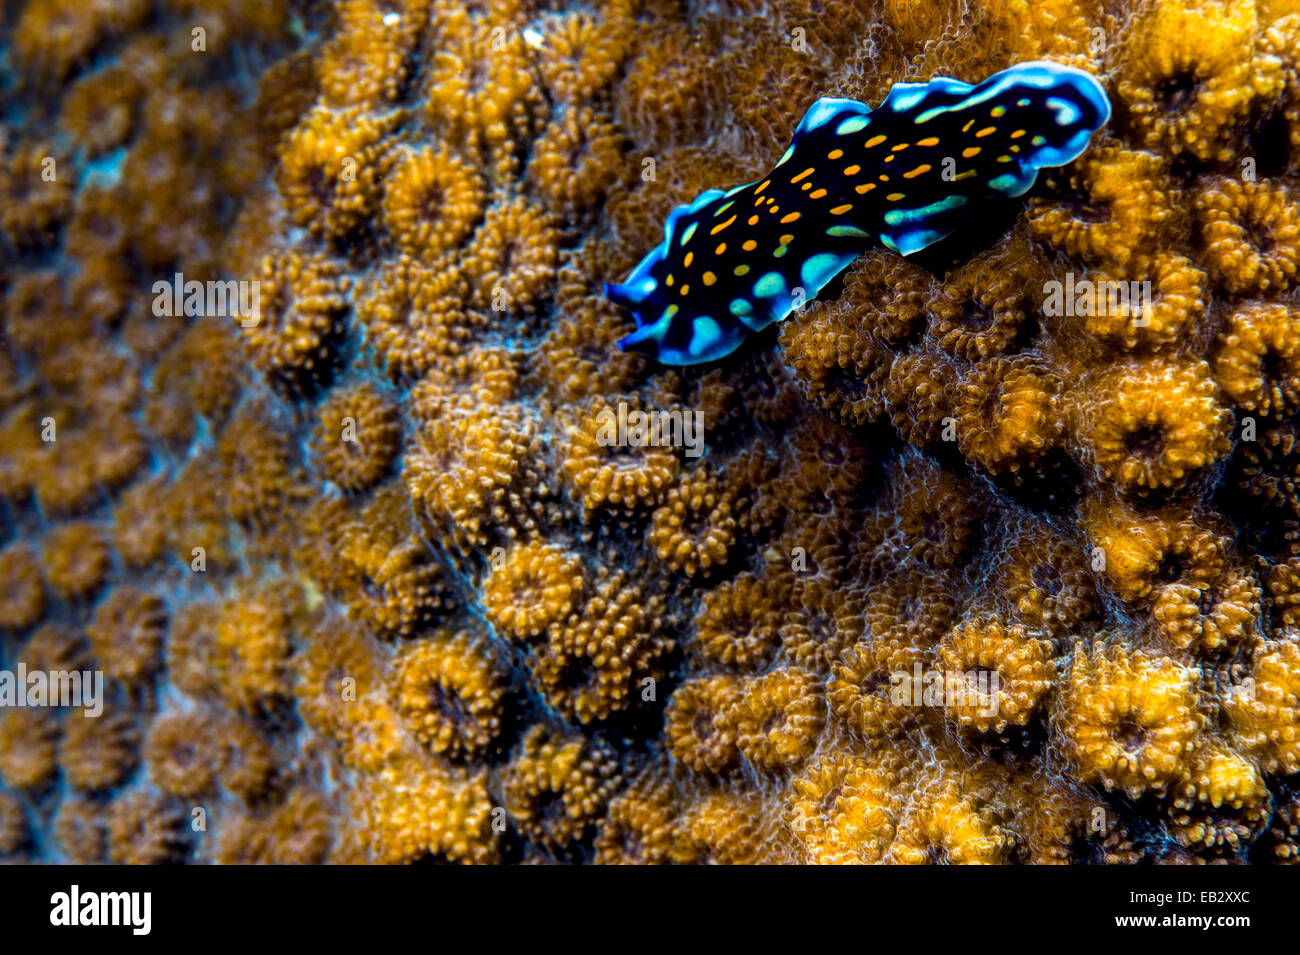 An elegant Linda's flatworm moves across the volcanic-like surface of a hard coral. Stock Photo